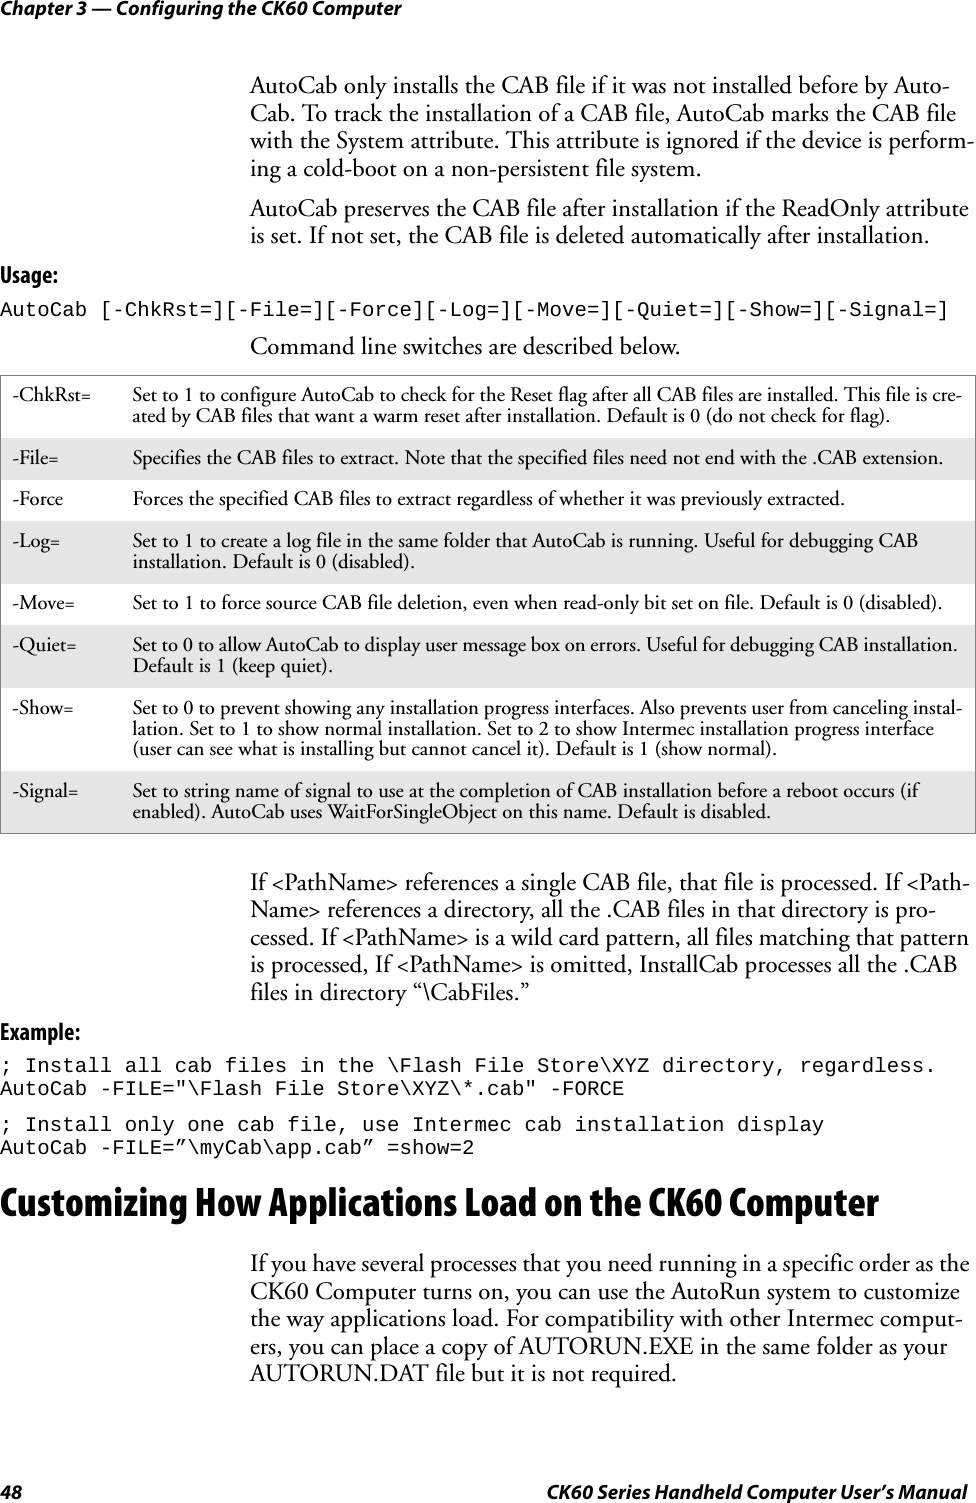 Chapter 3 — Configuring the CK60 Computer48 CK60 Series Handheld Computer User’s ManualAutoCab only installs the CAB file if it was not installed before by Auto-Cab. To track the installation of a CAB file, AutoCab marks the CAB file with the System attribute. This attribute is ignored if the device is perform-ing a cold-boot on a non-persistent file system.AutoCab preserves the CAB file after installation if the ReadOnly attribute is set. If not set, the CAB file is deleted automatically after installation.Usage:AutoCab [-ChkRst=][-File=][-Force][-Log=][-Move=][-Quiet=][-Show=][-Signal=]Command line switches are described below.If &lt;PathName&gt; references a single CAB file, that file is processed. If &lt;Path-Name&gt; references a directory, all the .CAB files in that directory is pro-cessed. If &lt;PathName&gt; is a wild card pattern, all files matching that pattern is processed, If &lt;PathName&gt; is omitted, InstallCab processes all the .CAB files in directory “\CabFiles.”Example:; Install all cab files in the \Flash File Store\XYZ directory, regardless.AutoCab -FILE=&quot;\Flash File Store\XYZ\*.cab&quot; -FORCE; Install only one cab file, use Intermec cab installation displayAutoCab -FILE=”\myCab\app.cab” =show=2Customizing How Applications Load on the CK60 ComputerIf you have several processes that you need running in a specific order as the CK60 Computer turns on, you can use the AutoRun system to customize the way applications load. For compatibility with other Intermec comput-ers, you can place a copy of AUTORUN.EXE in the same folder as your AUTORUN.DAT file but it is not required.-ChkRst= Set to 1 to configure AutoCab to check for the Reset flag after all CAB files are installed. This file is cre-ated by CAB files that want a warm reset after installation. Default is 0 (do not check for flag).-File= Specifies the CAB files to extract. Note that the specified files need not end with the .CAB extension.-Force Forces the specified CAB files to extract regardless of whether it was previously extracted.-Log= Set to 1 to create a log file in the same folder that AutoCab is running. Useful for debugging CAB installation. Default is 0 (disabled).-Move= Set to 1 to force source CAB file deletion, even when read-only bit set on file. Default is 0 (disabled).-Quiet= Set to 0 to allow AutoCab to display user message box on errors. Useful for debugging CAB installation. Default is 1 (keep quiet).-Show= Set to 0 to prevent showing any installation progress interfaces. Also prevents user from canceling instal-lation. Set to 1 to show normal installation. Set to 2 to show Intermec installation progress interface (user can see what is installing but cannot cancel it). Default is 1 (show normal).-Signal= Set to string name of signal to use at the completion of CAB installation before a reboot occurs (if enabled). AutoCab uses WaitForSingleObject on this name. Default is disabled.